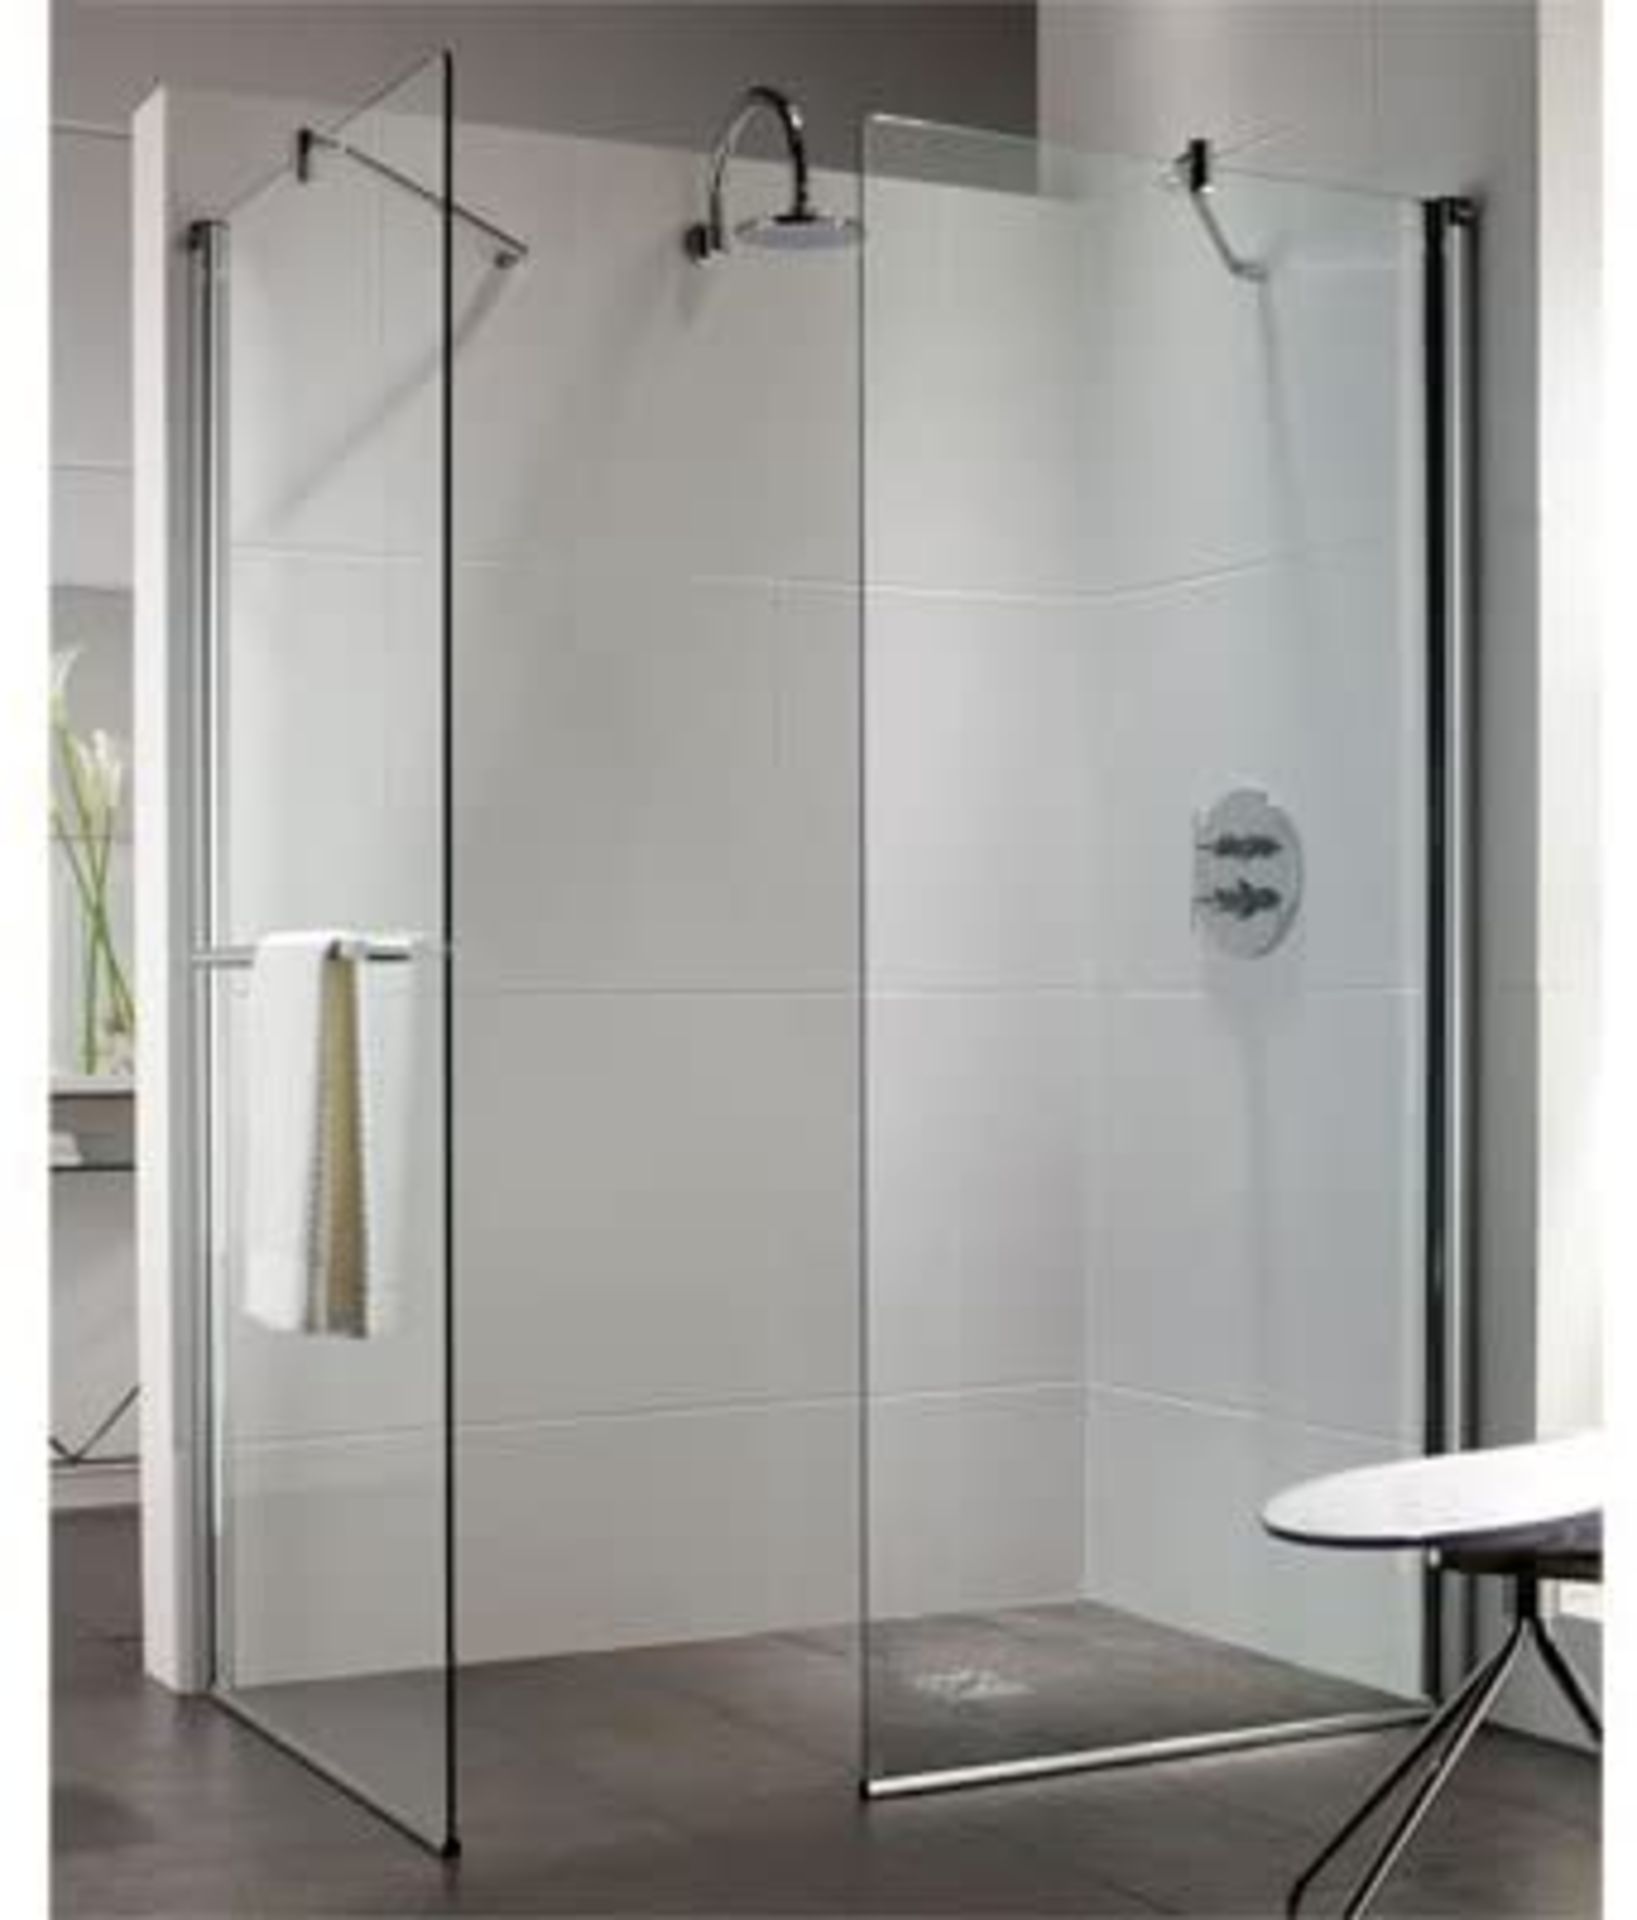 NEW Twyfords 1100x800mm Walk In Shower Enclosure. Hydr8 Walk In Flat Panel LEFT HAND Or RIGHT ...